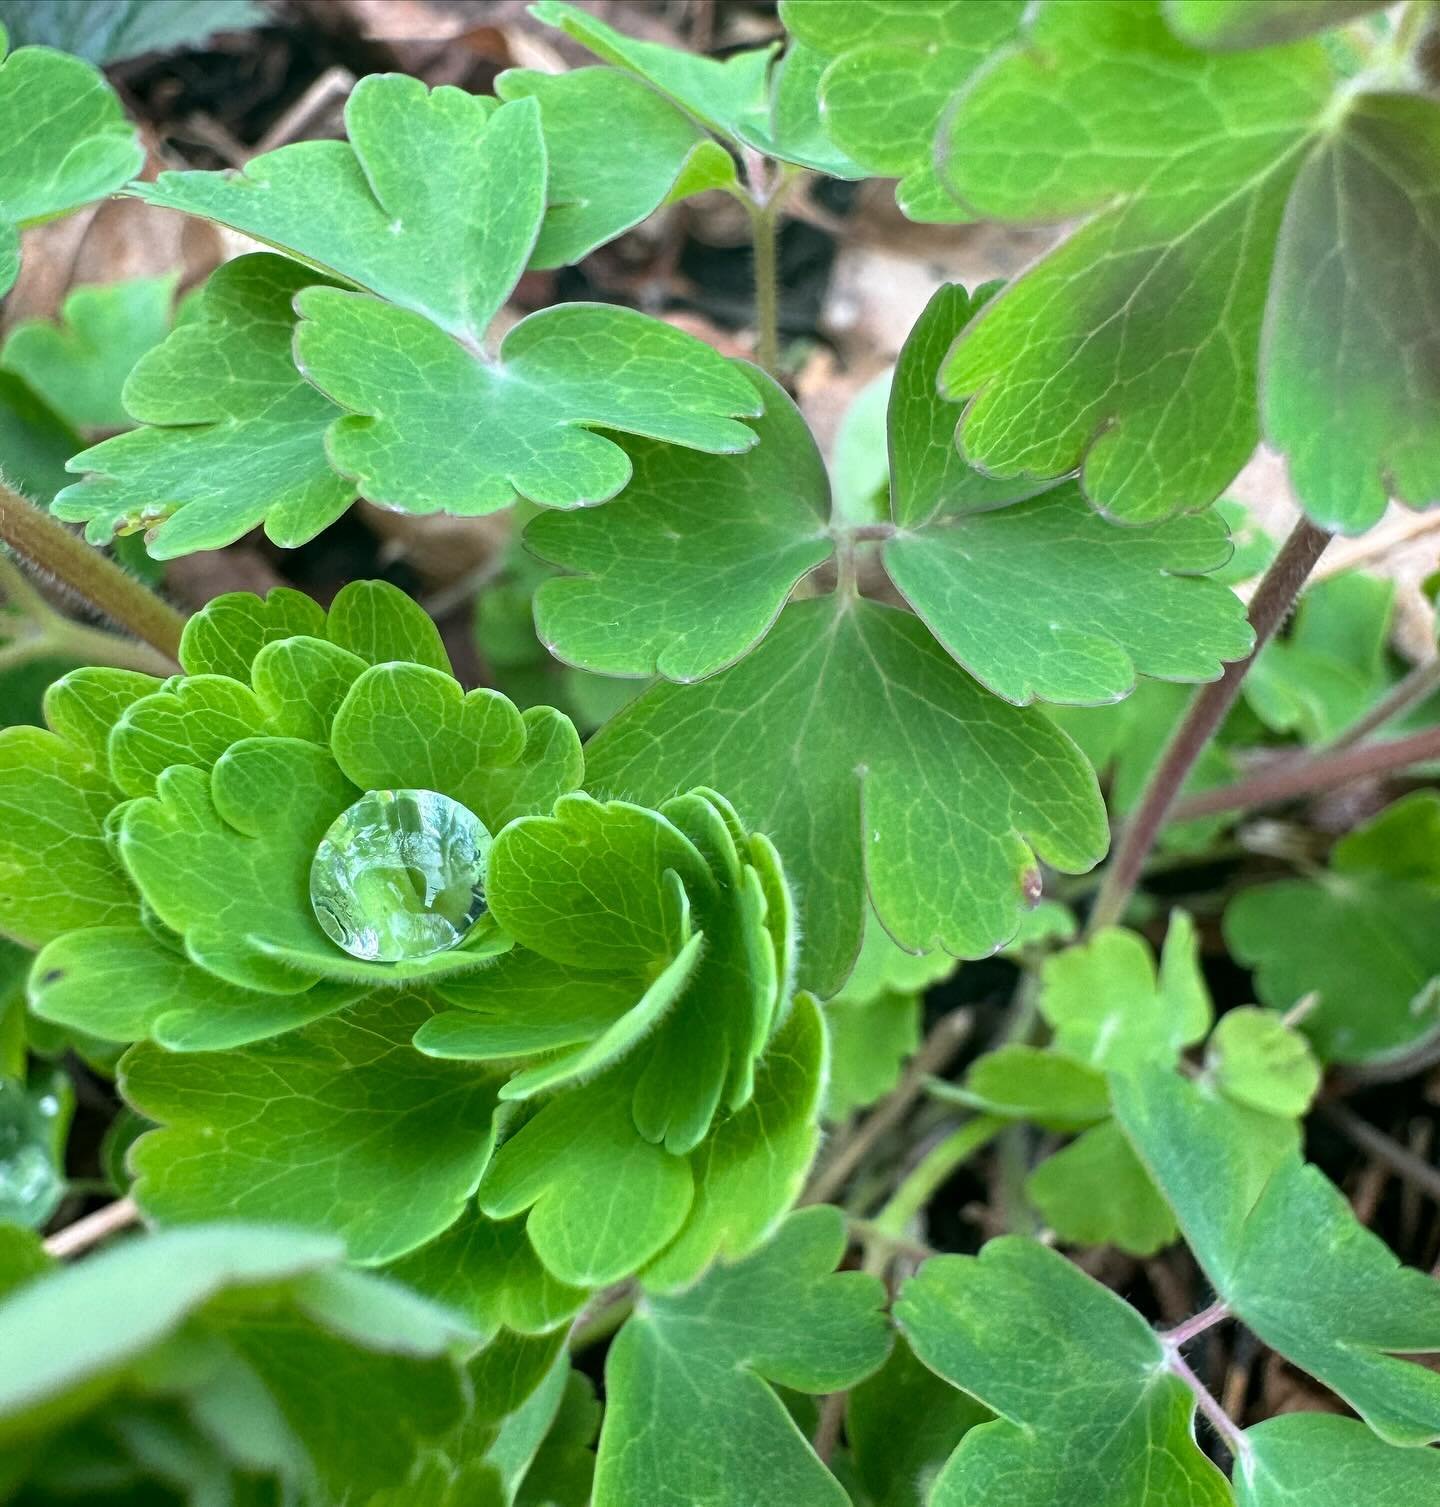 The perfect droplet of water sitting in some columbine foliage. One of my favorite plants in early spring!